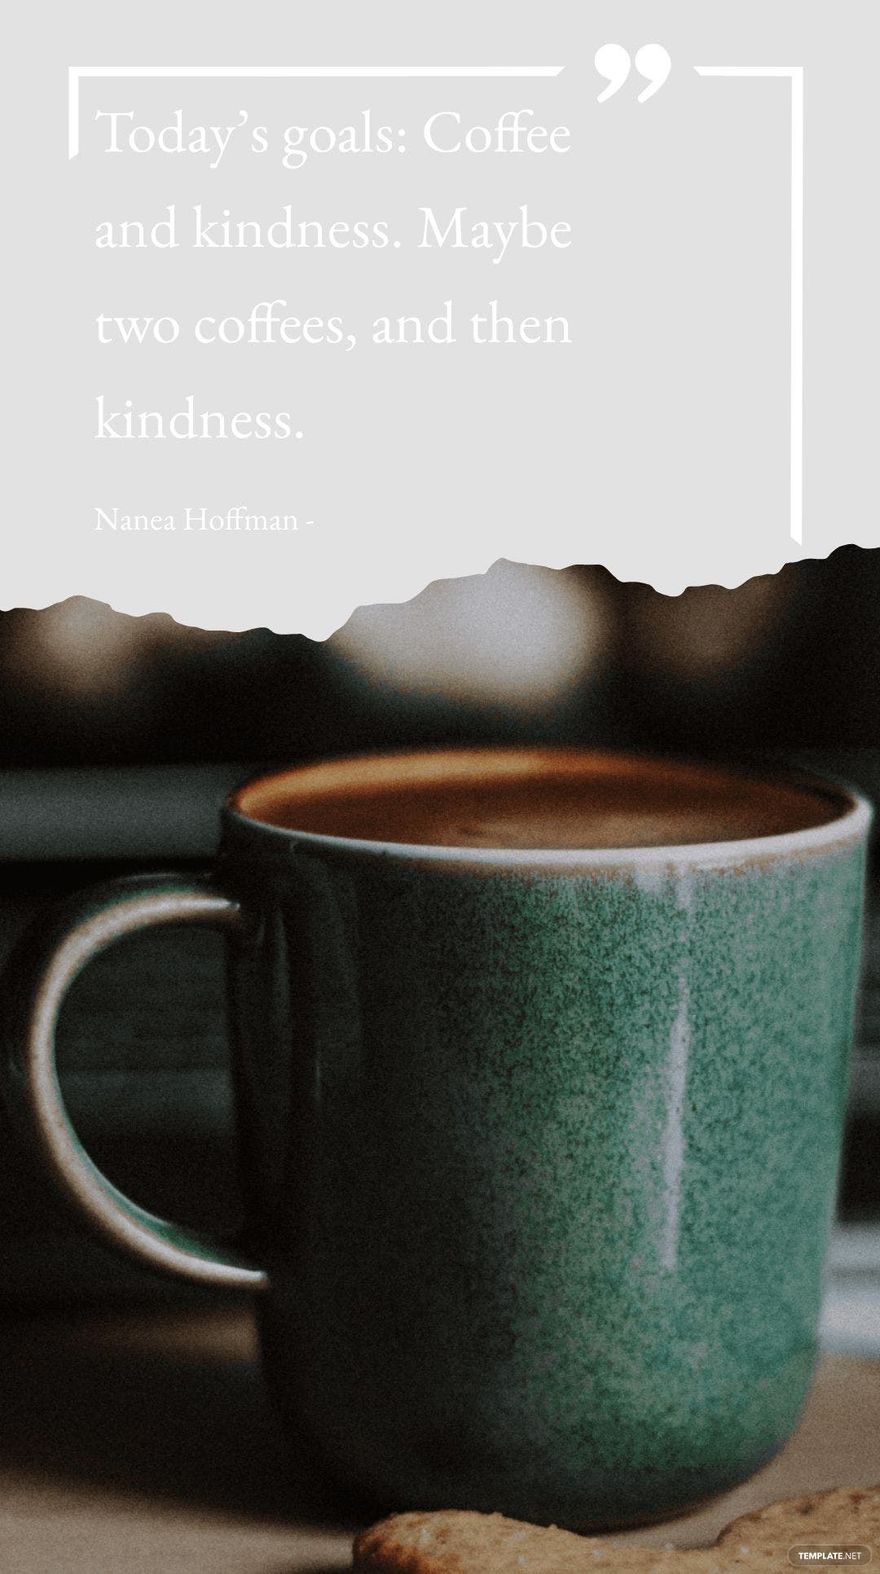 Nanea Hoffman - Today’s goals: Coffee and kindness. Maybe two coffees, and then kindness.